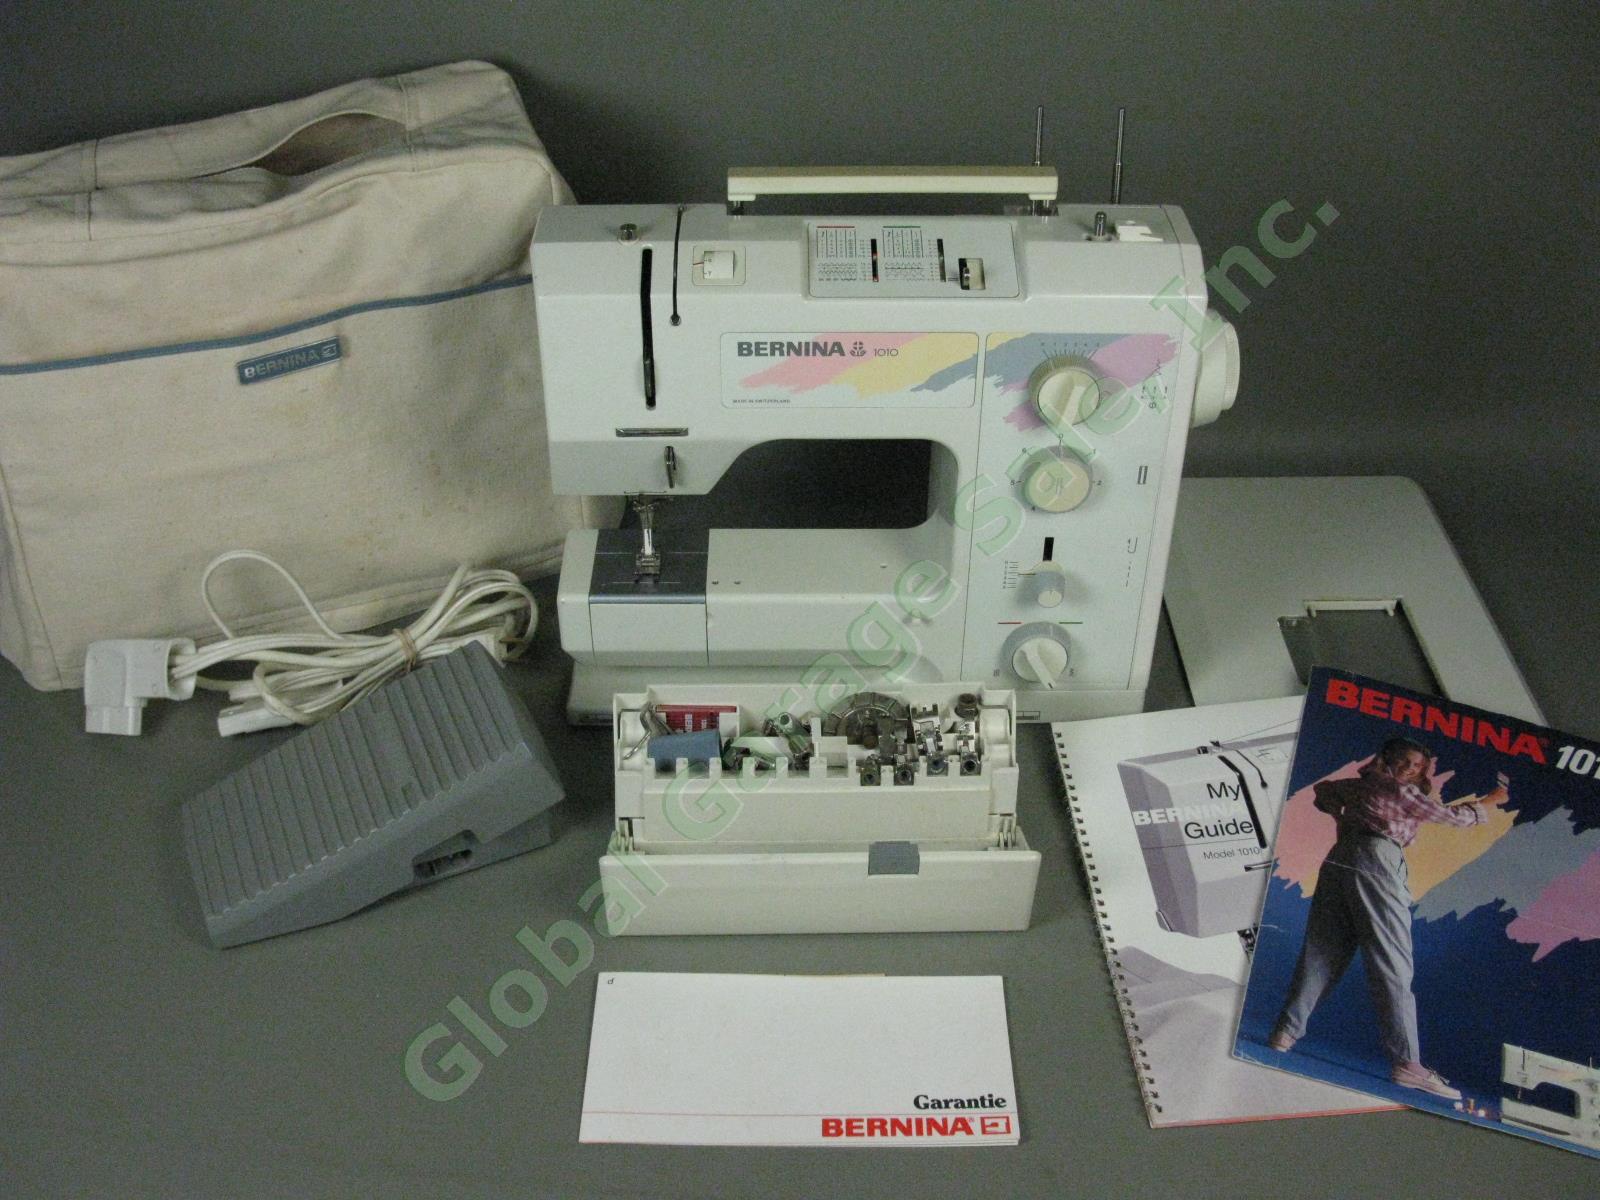 Bernina 1010 Sewing Machine w/Slide-On Extension Table Pedal Feet Manual Cover +